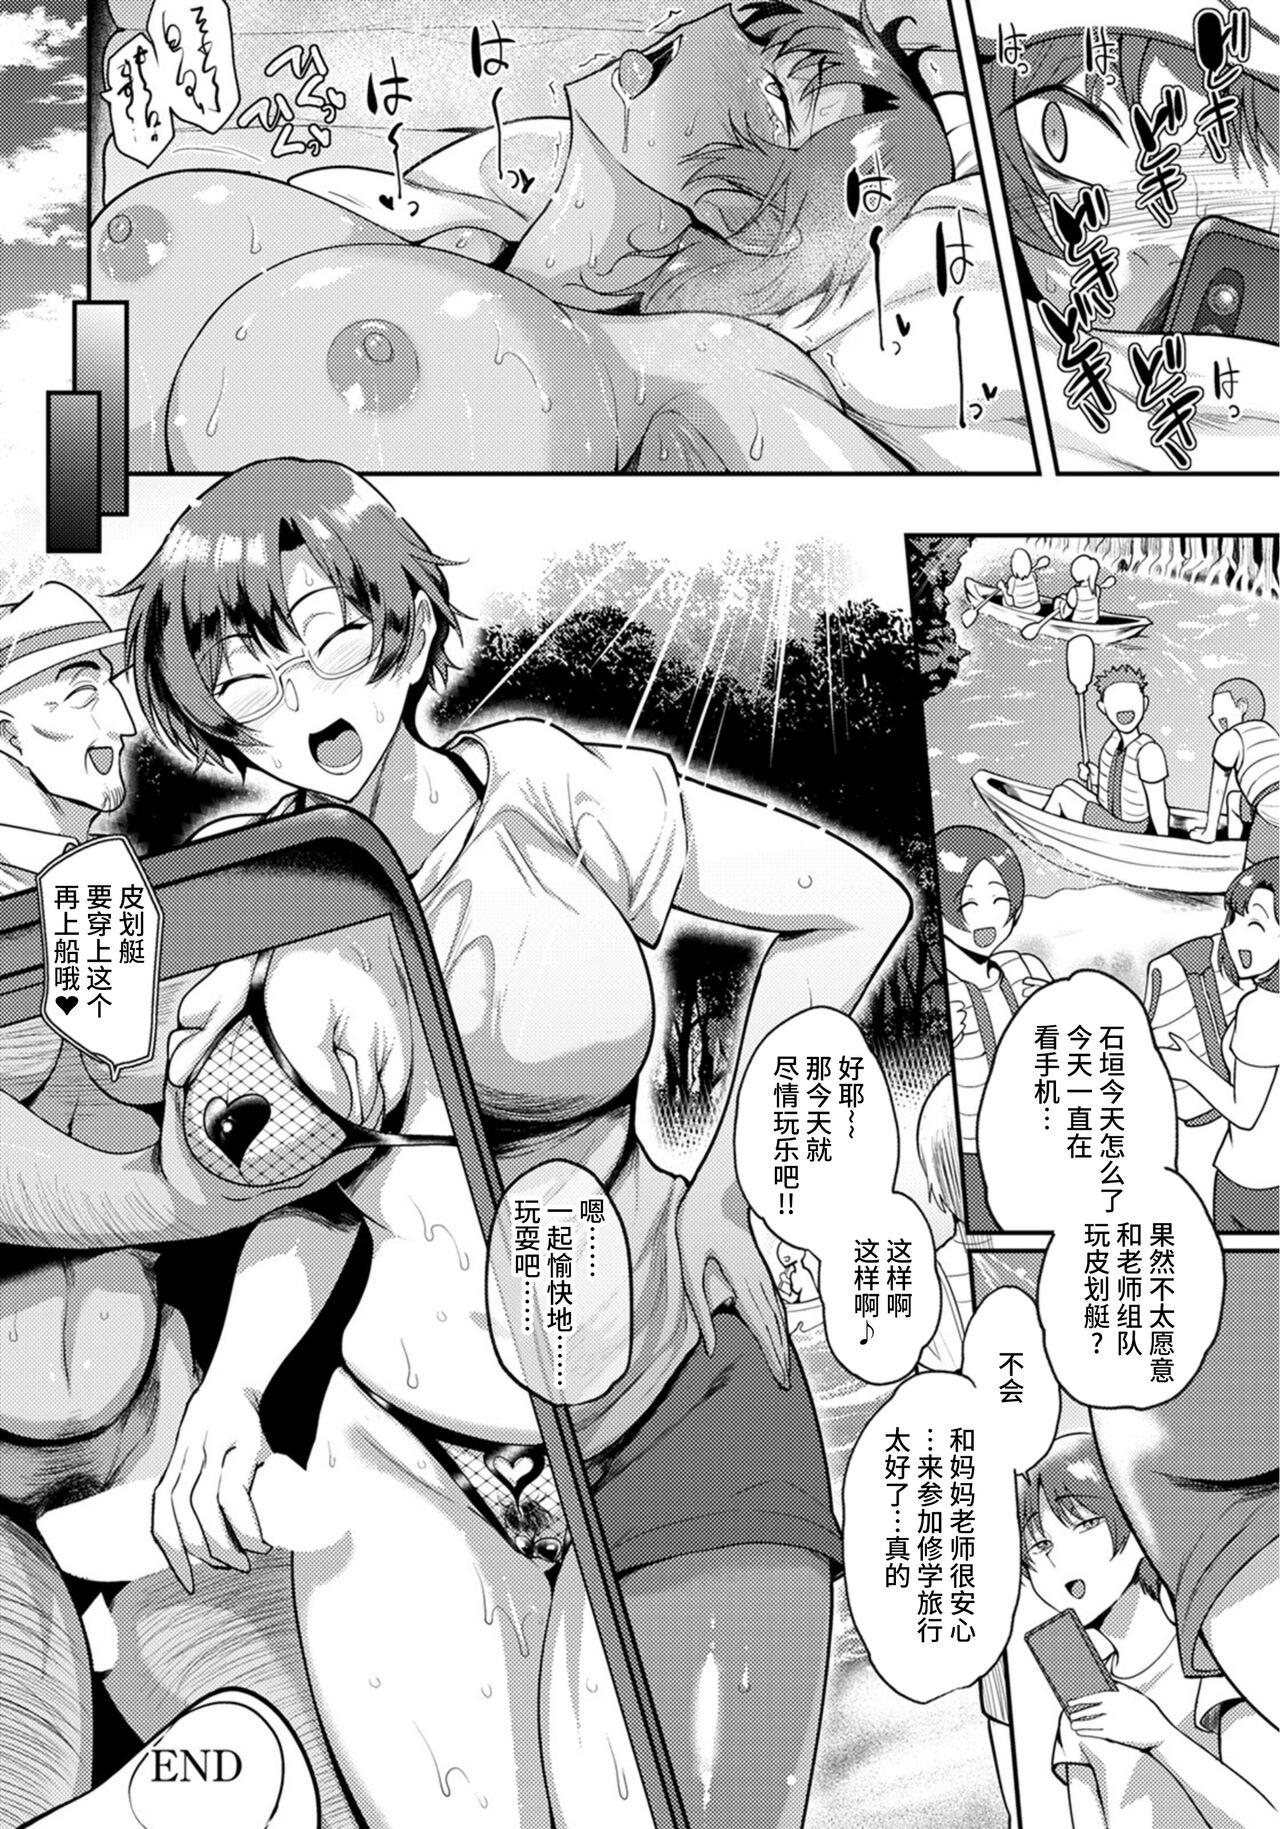 Chacal 襖外の牝影～先生は妖しく揺れて～ Pussyfucking - Page 20